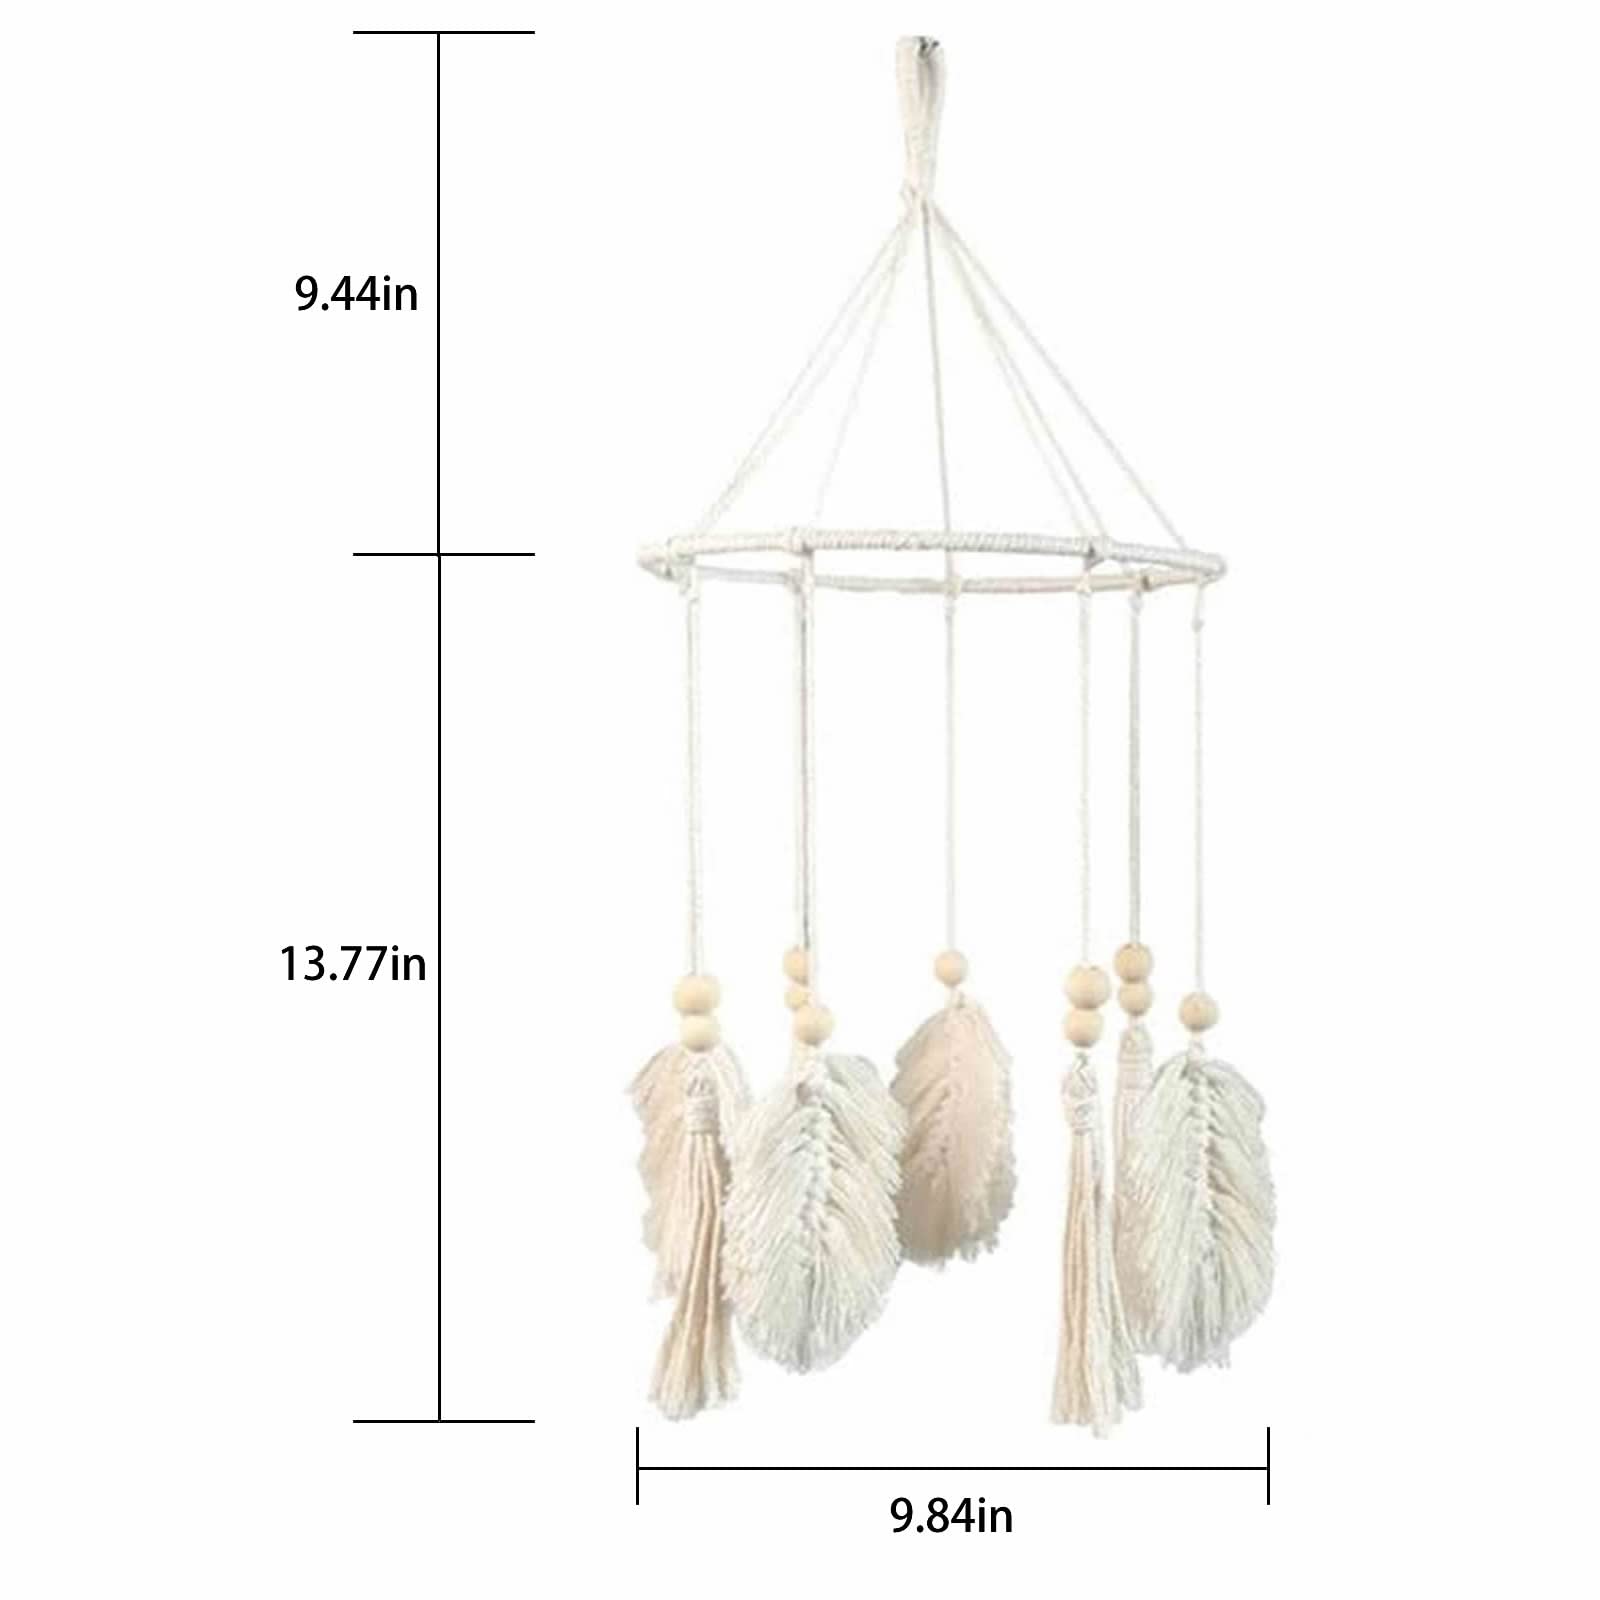 Bohemian Crib Mobile Cotton Woven Macrame Small Boho Dreamcatcher Tapastry Baby Bed Mobile Toys Hanging Wooden Nursery Decor for Girls,Baby Room Crib Bed